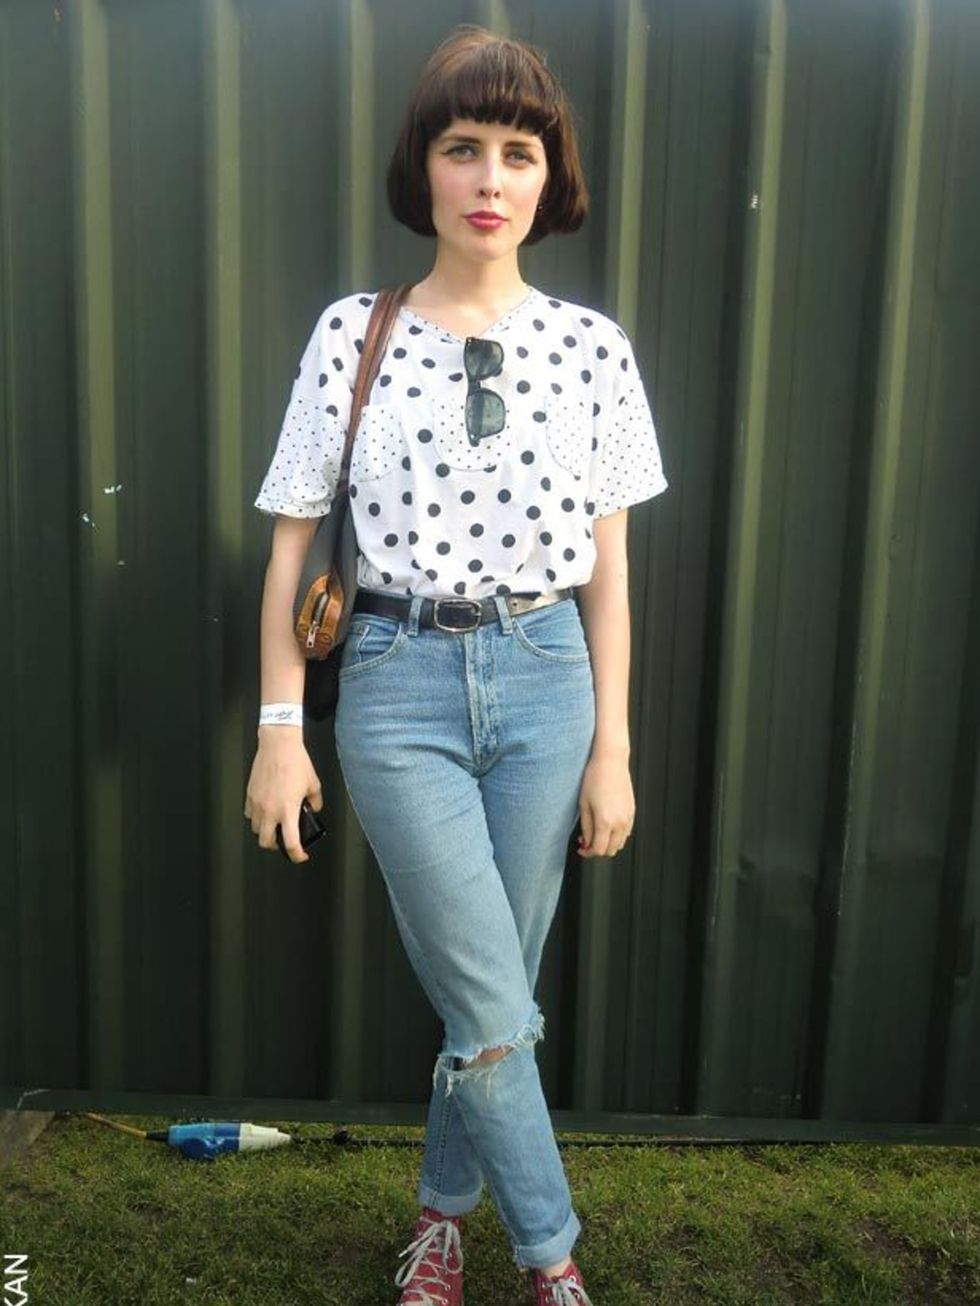 <p>Emma, 24, Freelance Journalist. Vintage top, jeans and sunglasses. Converse trainers, Urban Outfitters bag.</p>